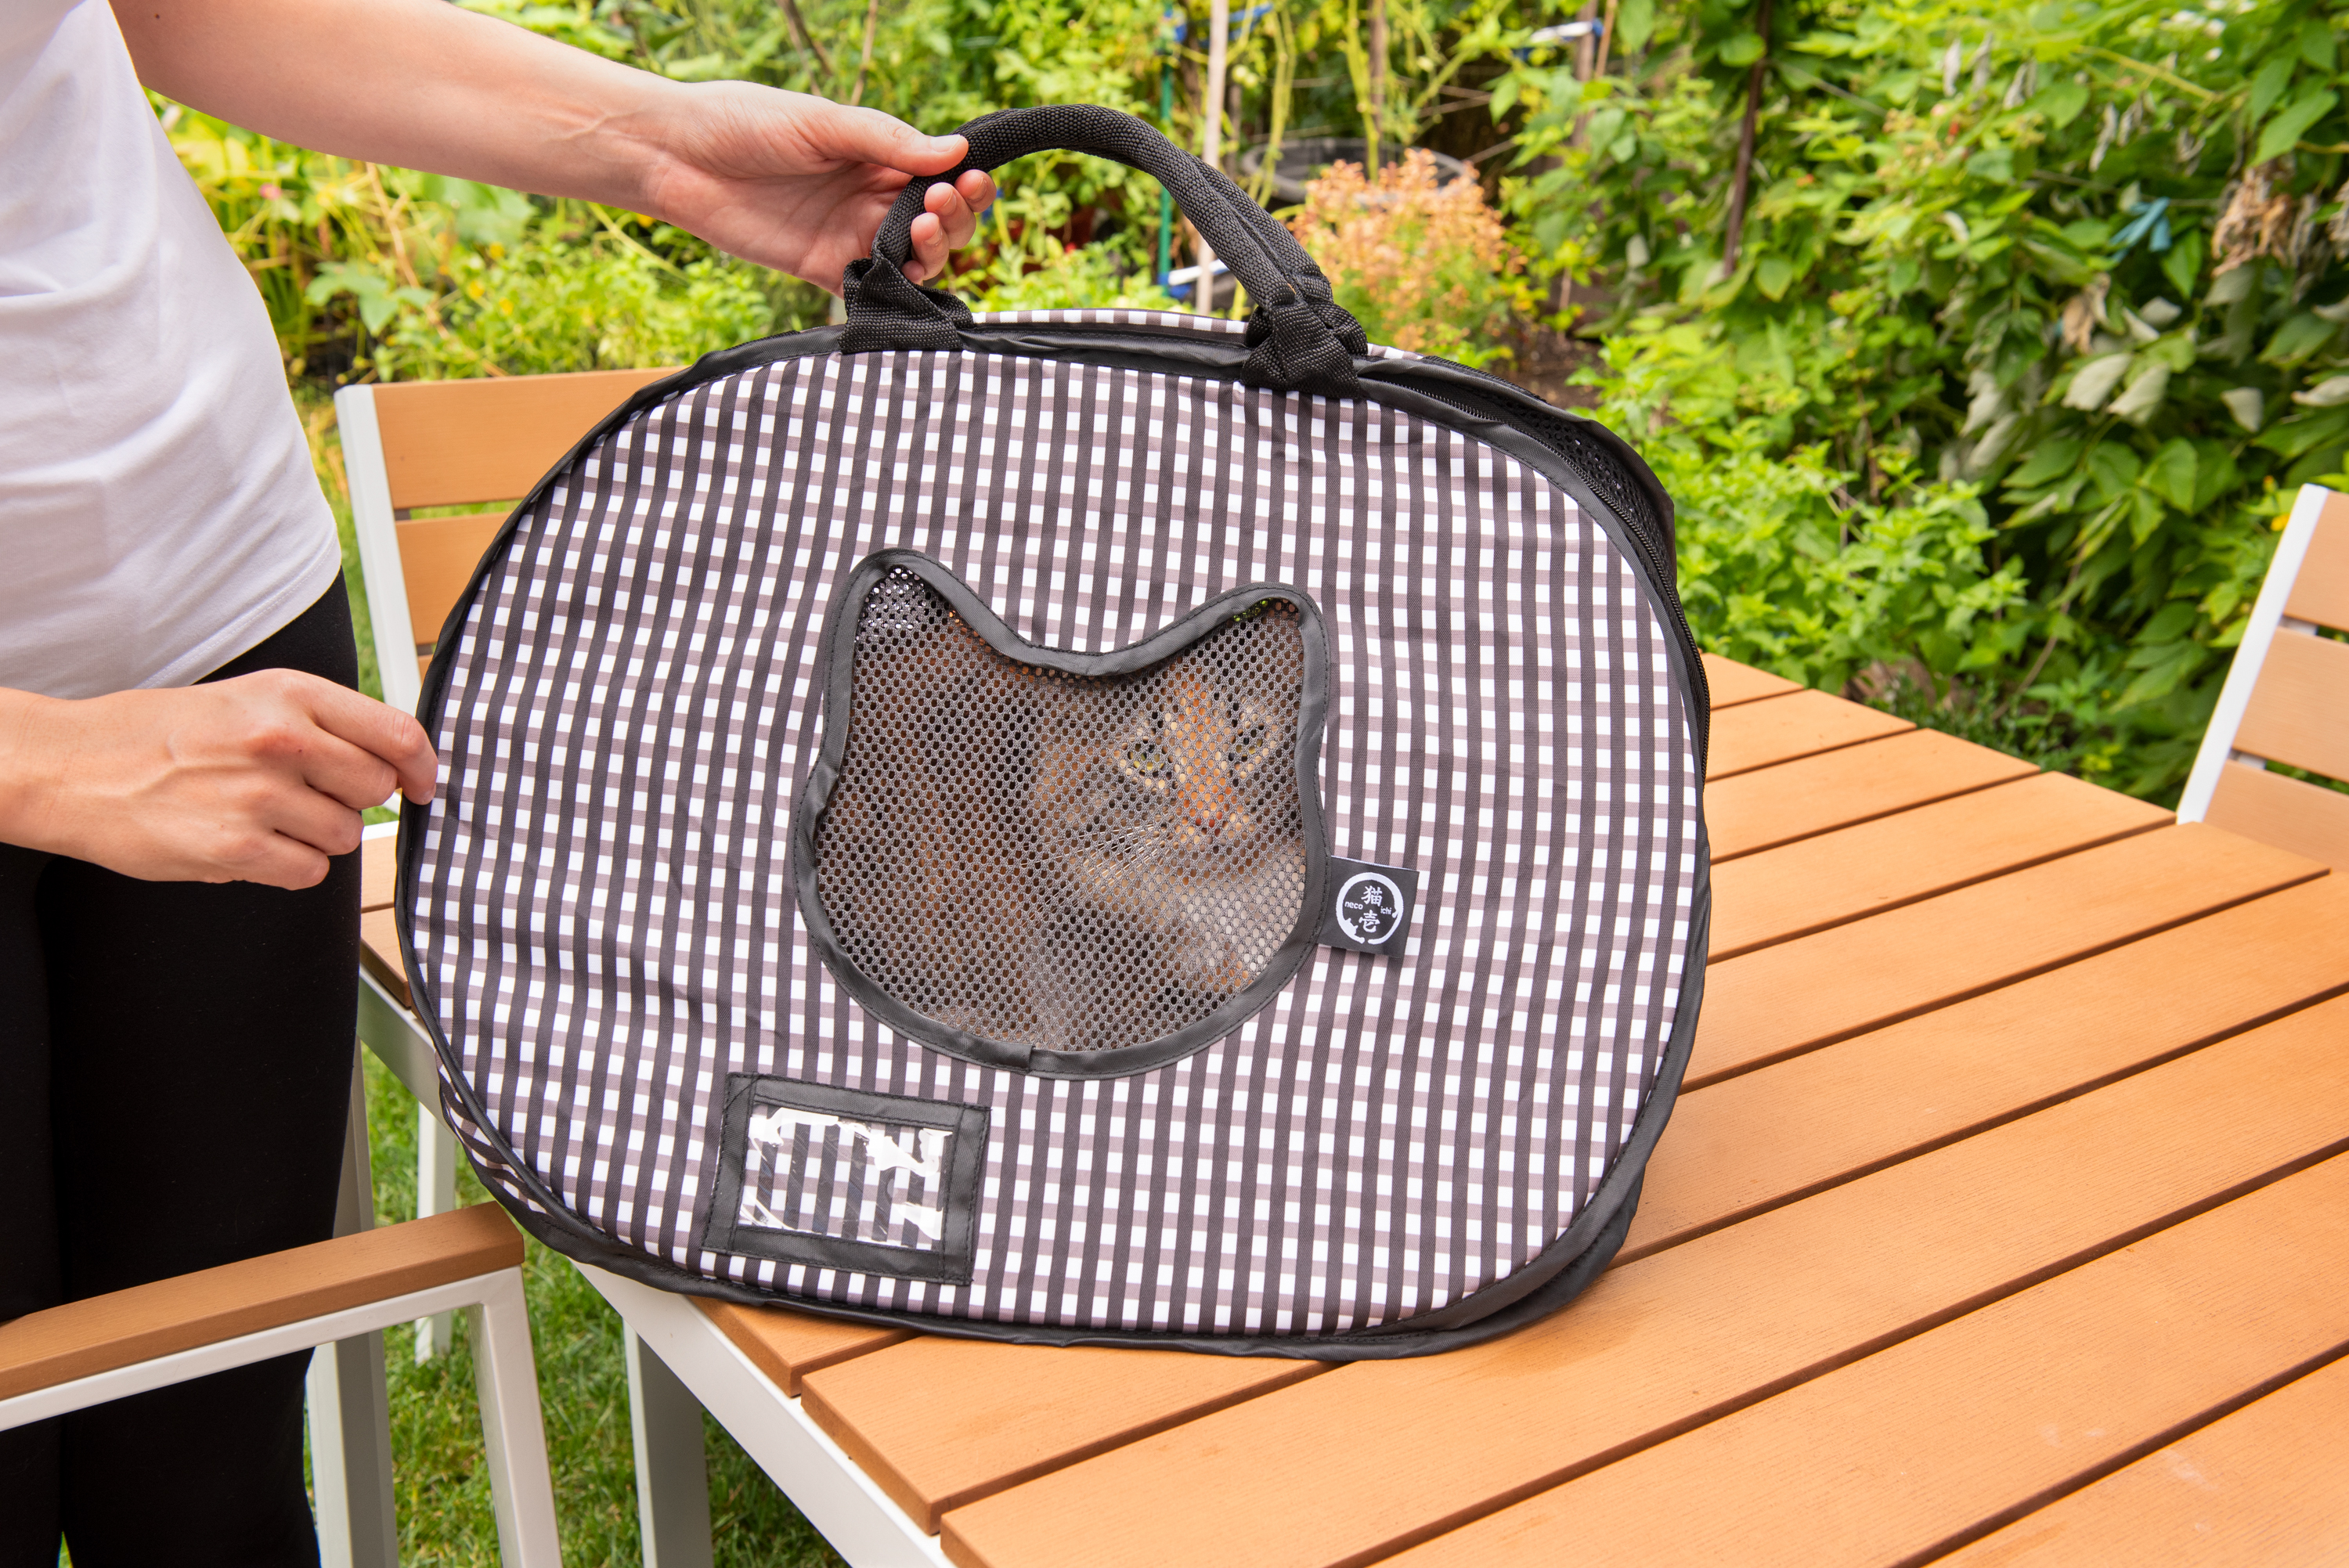 A Calico cat is seen sitting in a black & white checkered ultra-light collapsible cat carrier from Necoichi